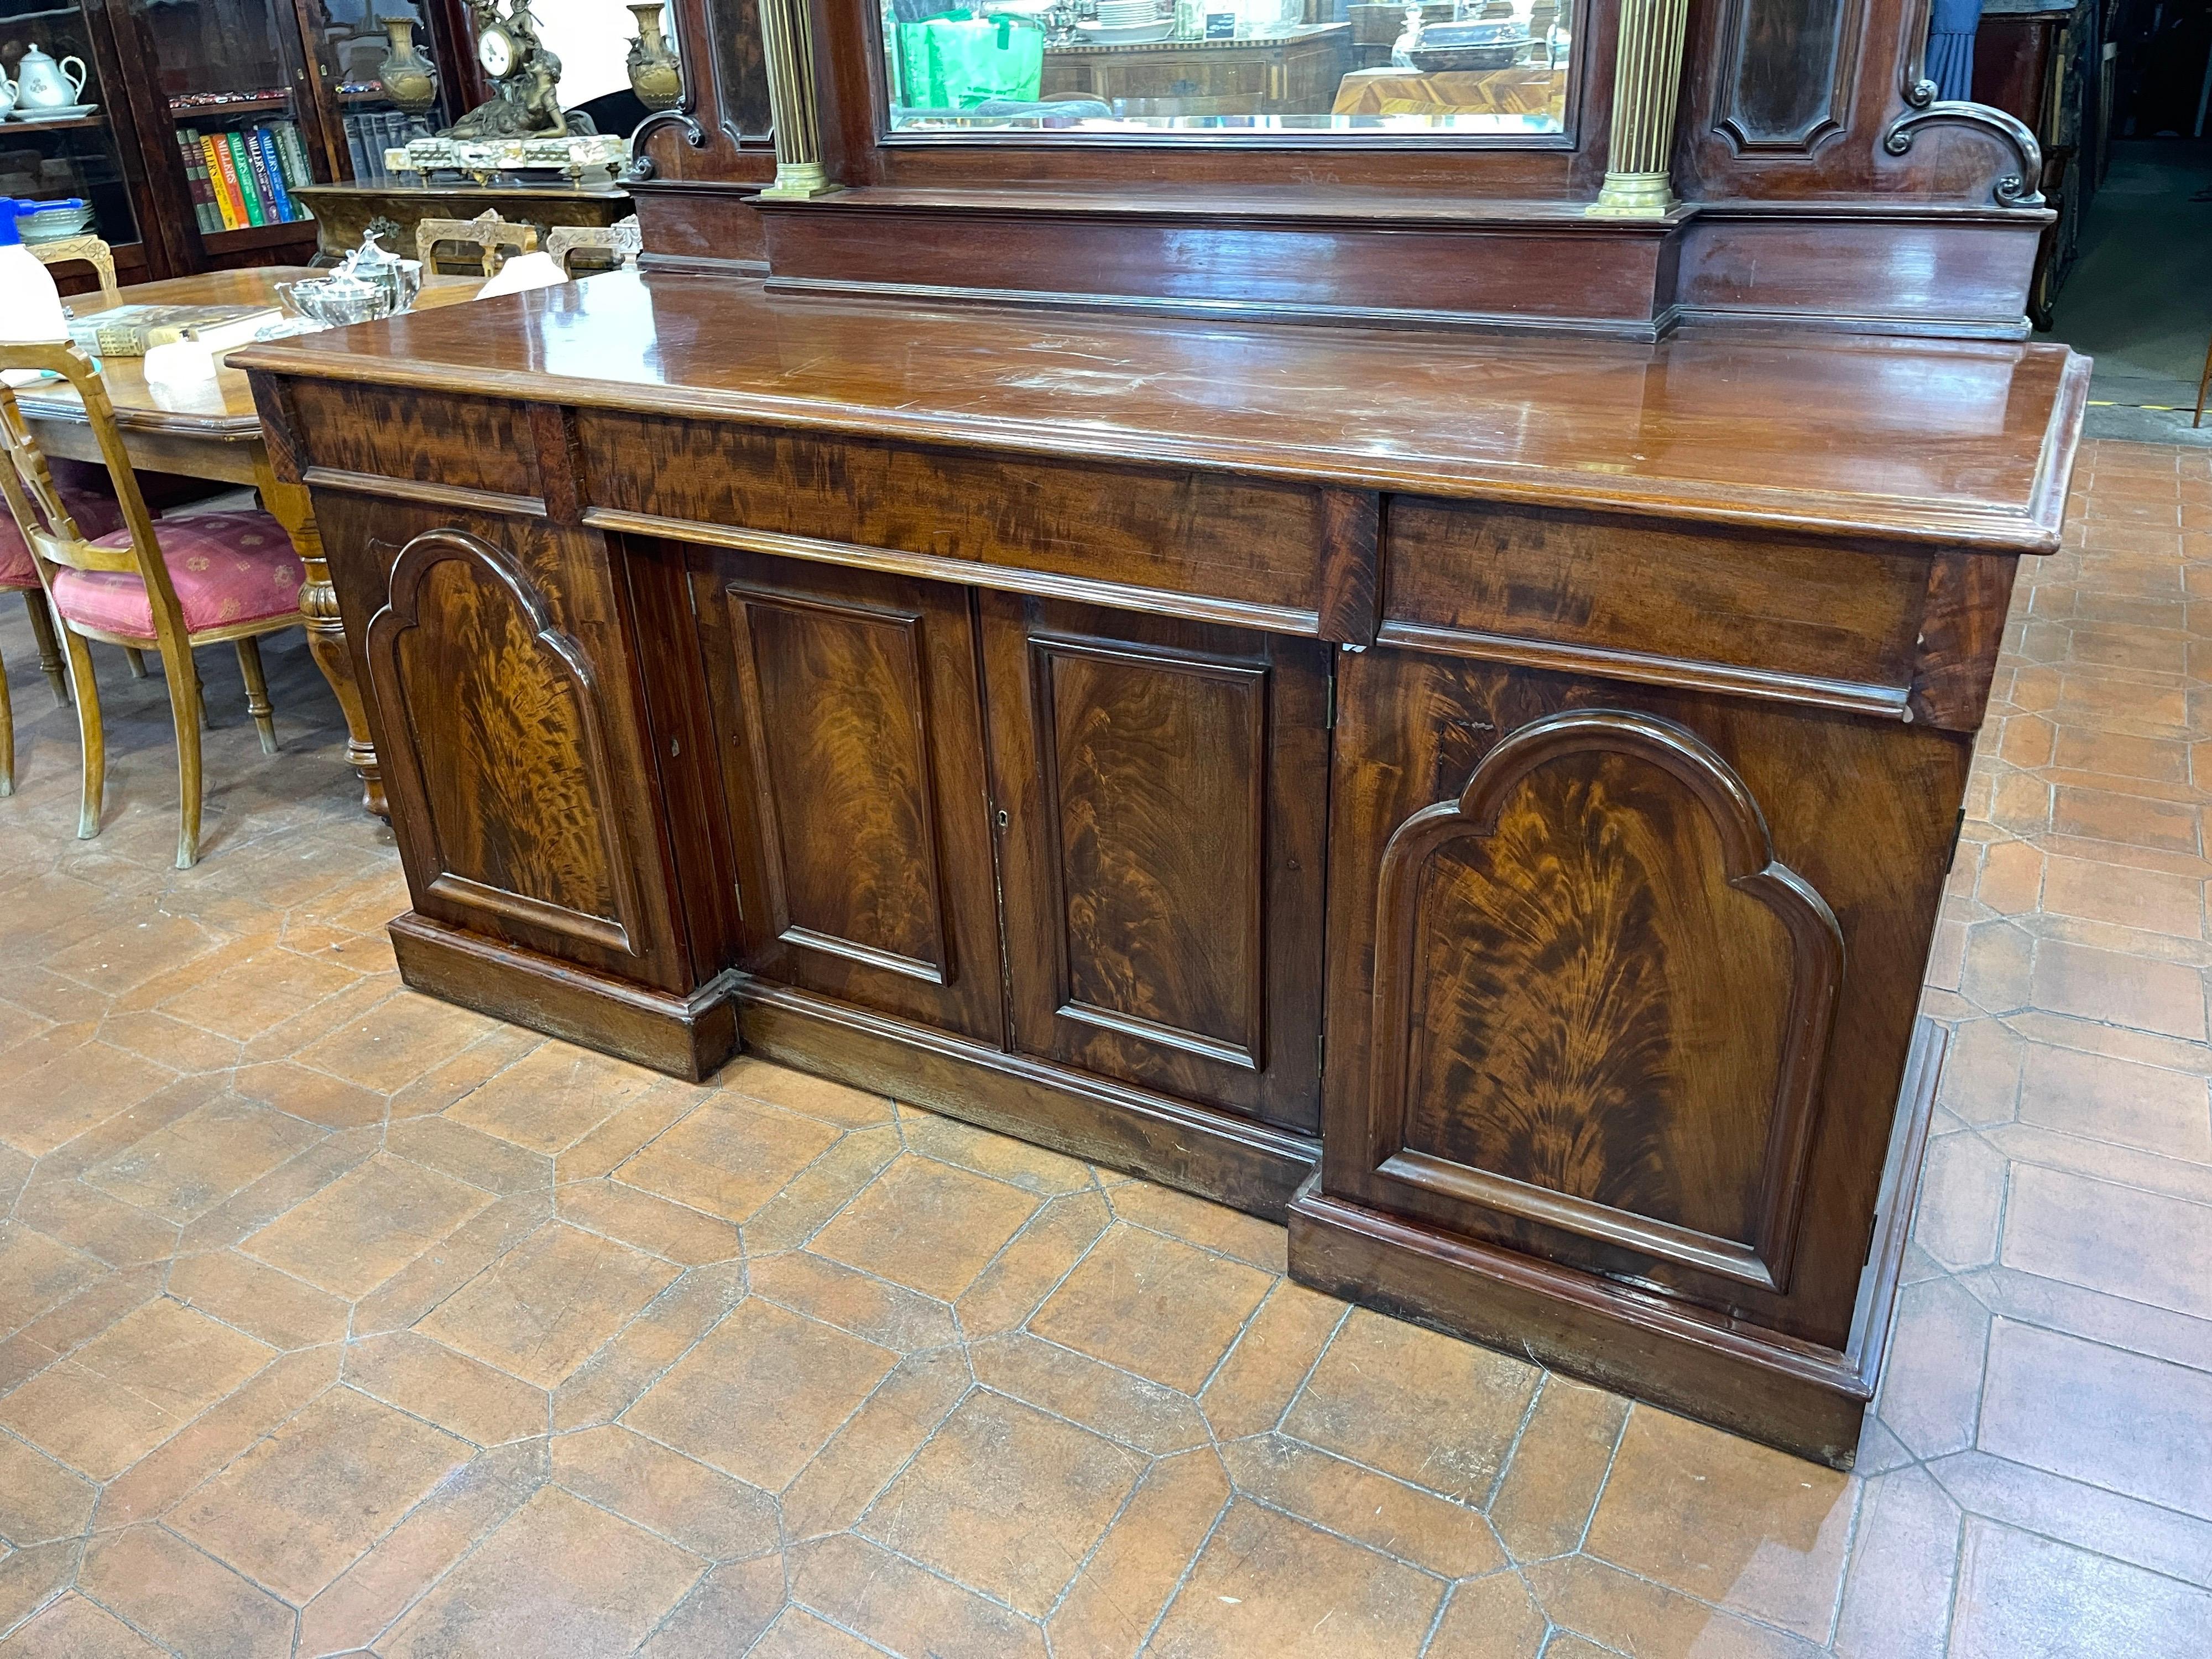 Beautiful English sideboard mirror back, late Victorian era (1880 circa), in mahogany wood and brass applications on the columns of the mirror.
Sideboard with four doors and three drawers, with mahogany and mahogany feather, embellished with two